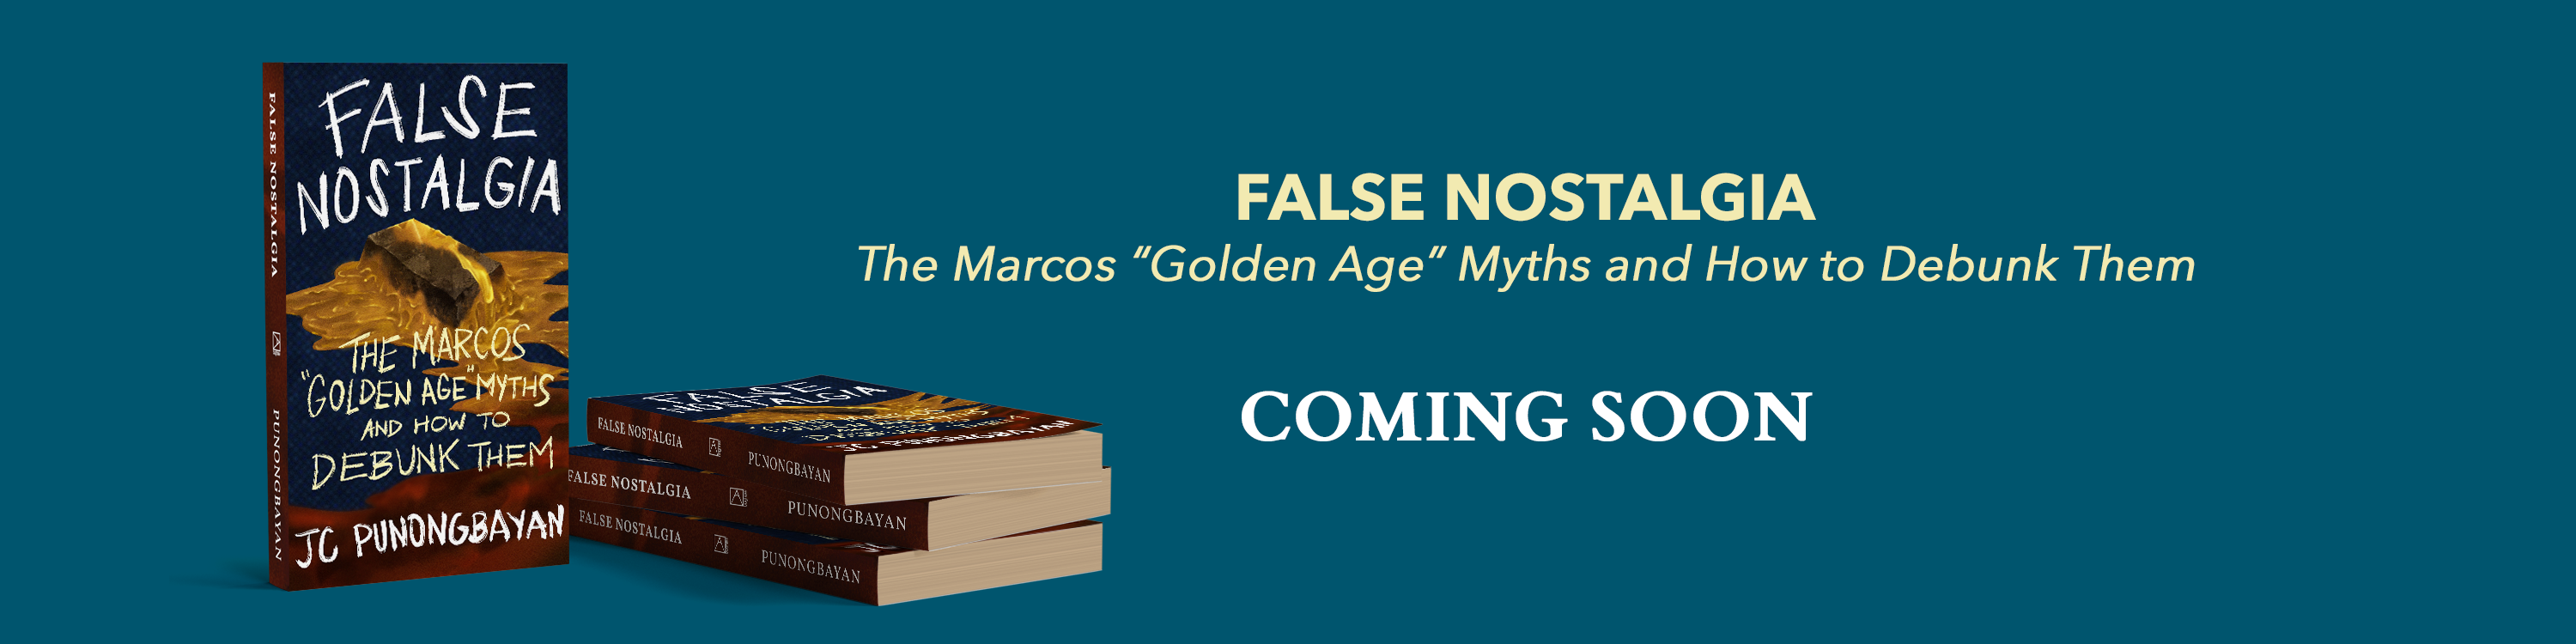 Pre-order your copy of False Nostalgia: The Marcos "Golden Age" Myths and How to Debunk Them